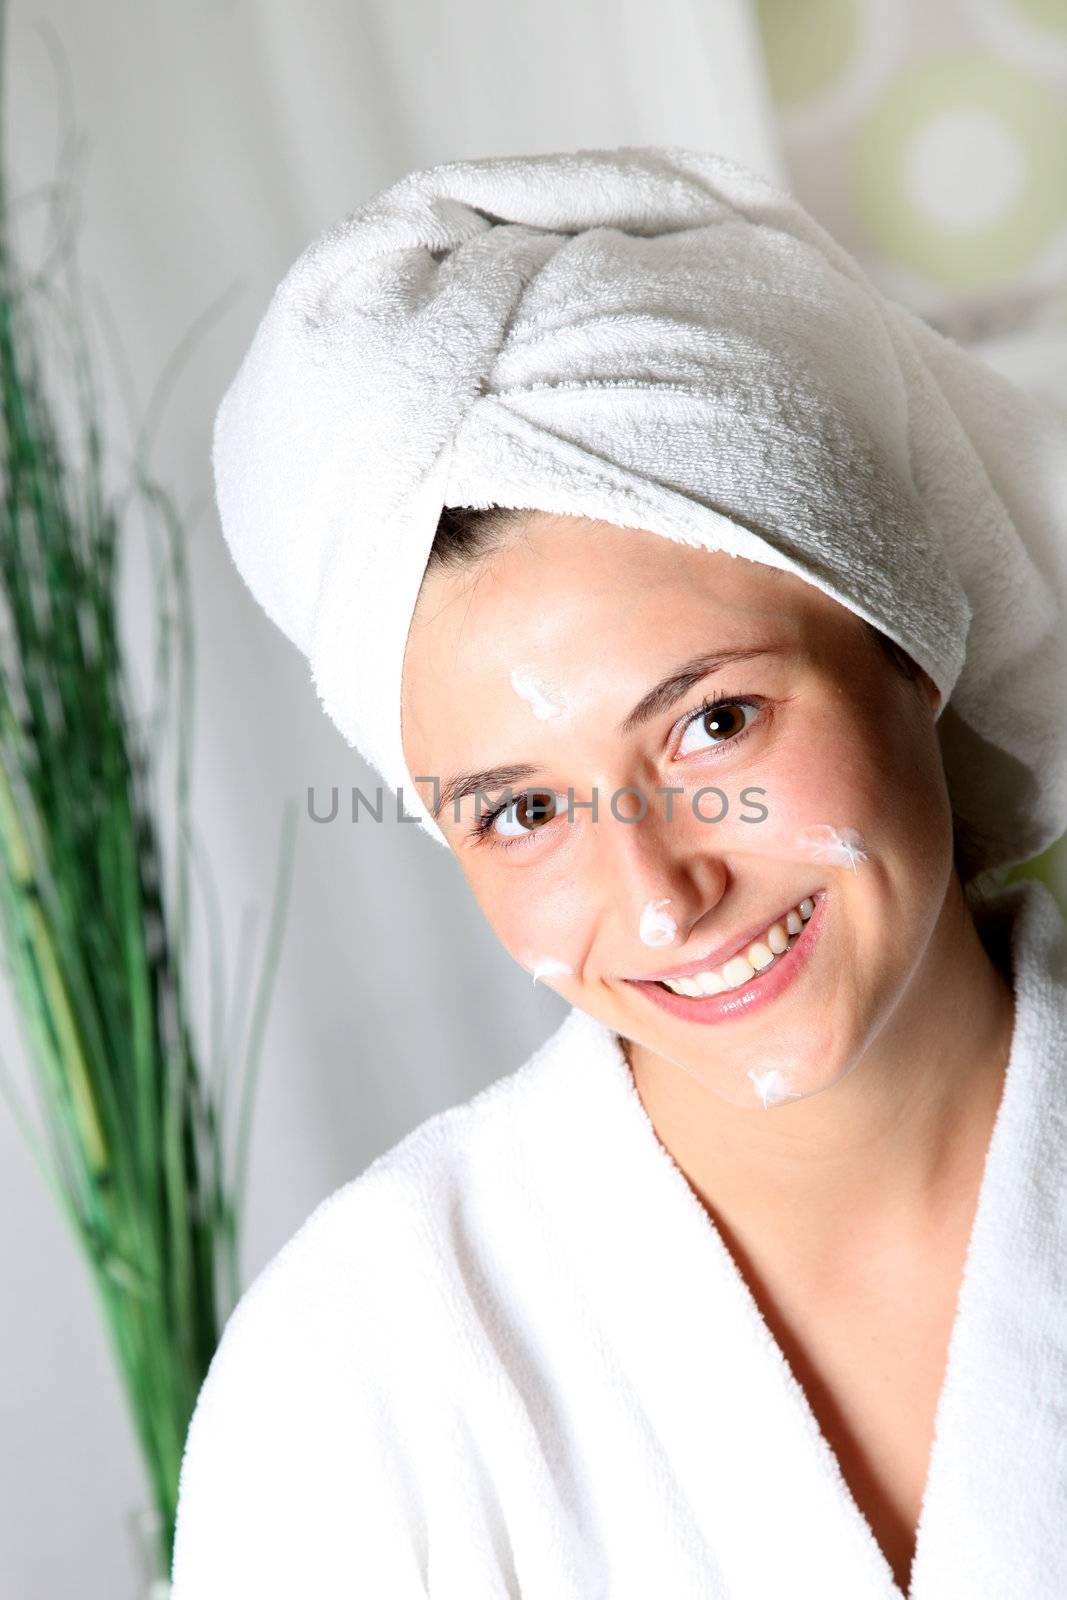  Smiling young woman with cream on her face relaxed. by Farina6000